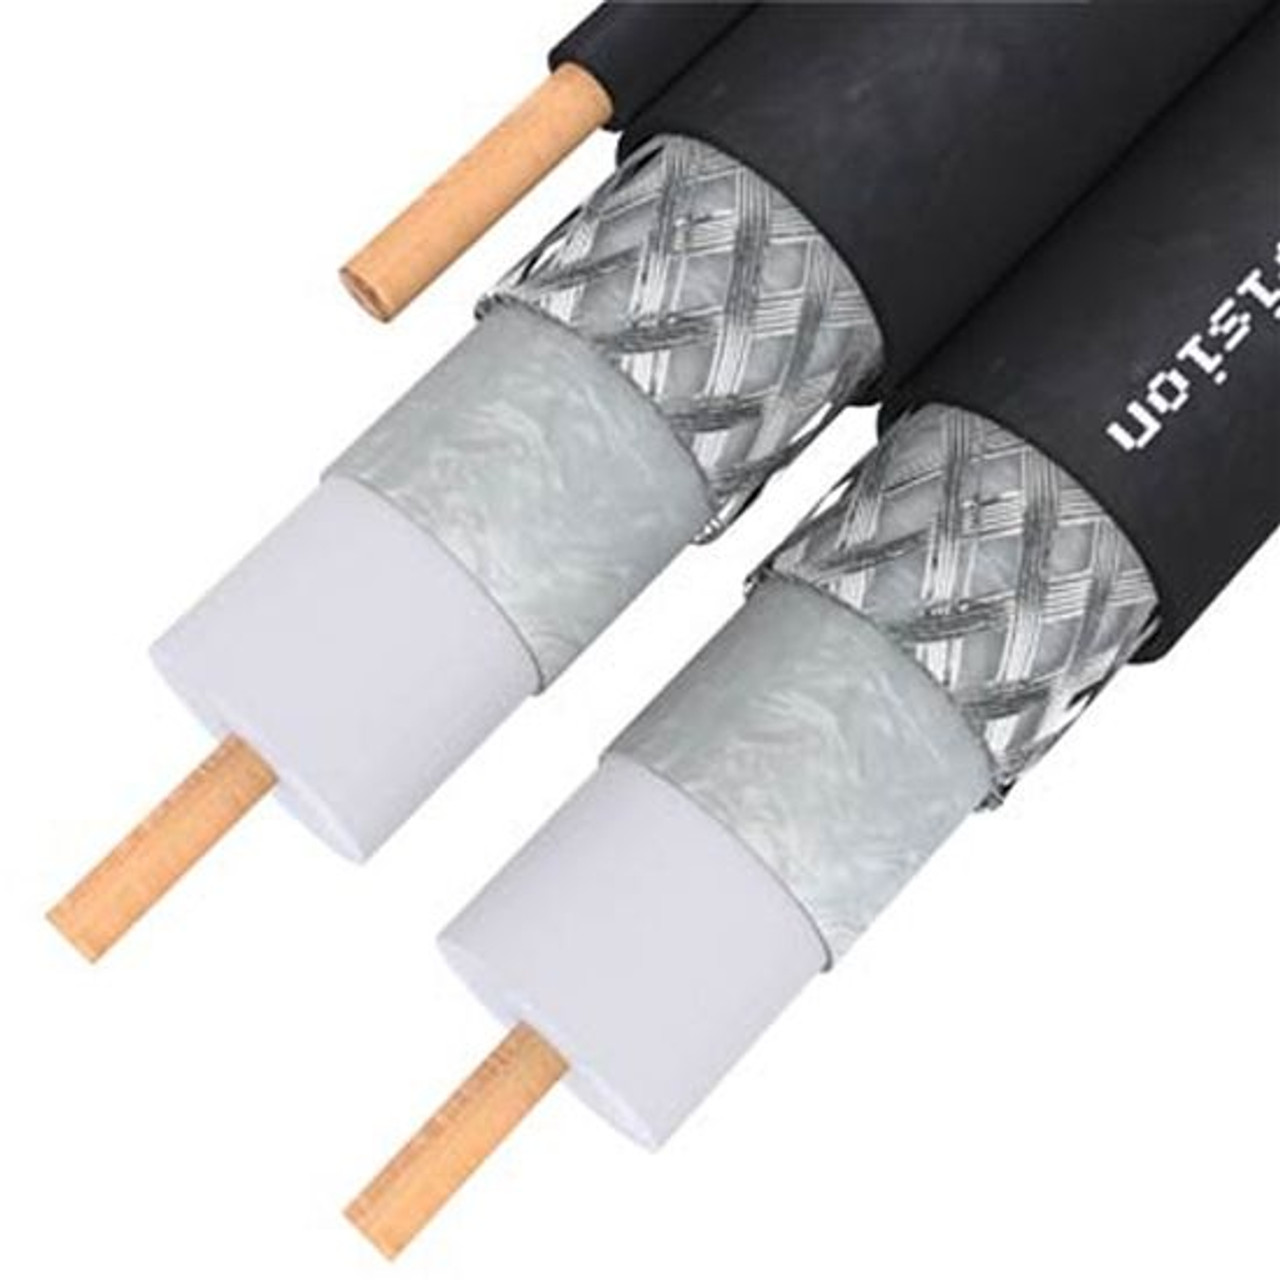 DirecTV CB3B06DSCR0-05 500 FT Dual RG6 Coaxial Cable 3 GHz Black Solid Copper With Ground Messinger